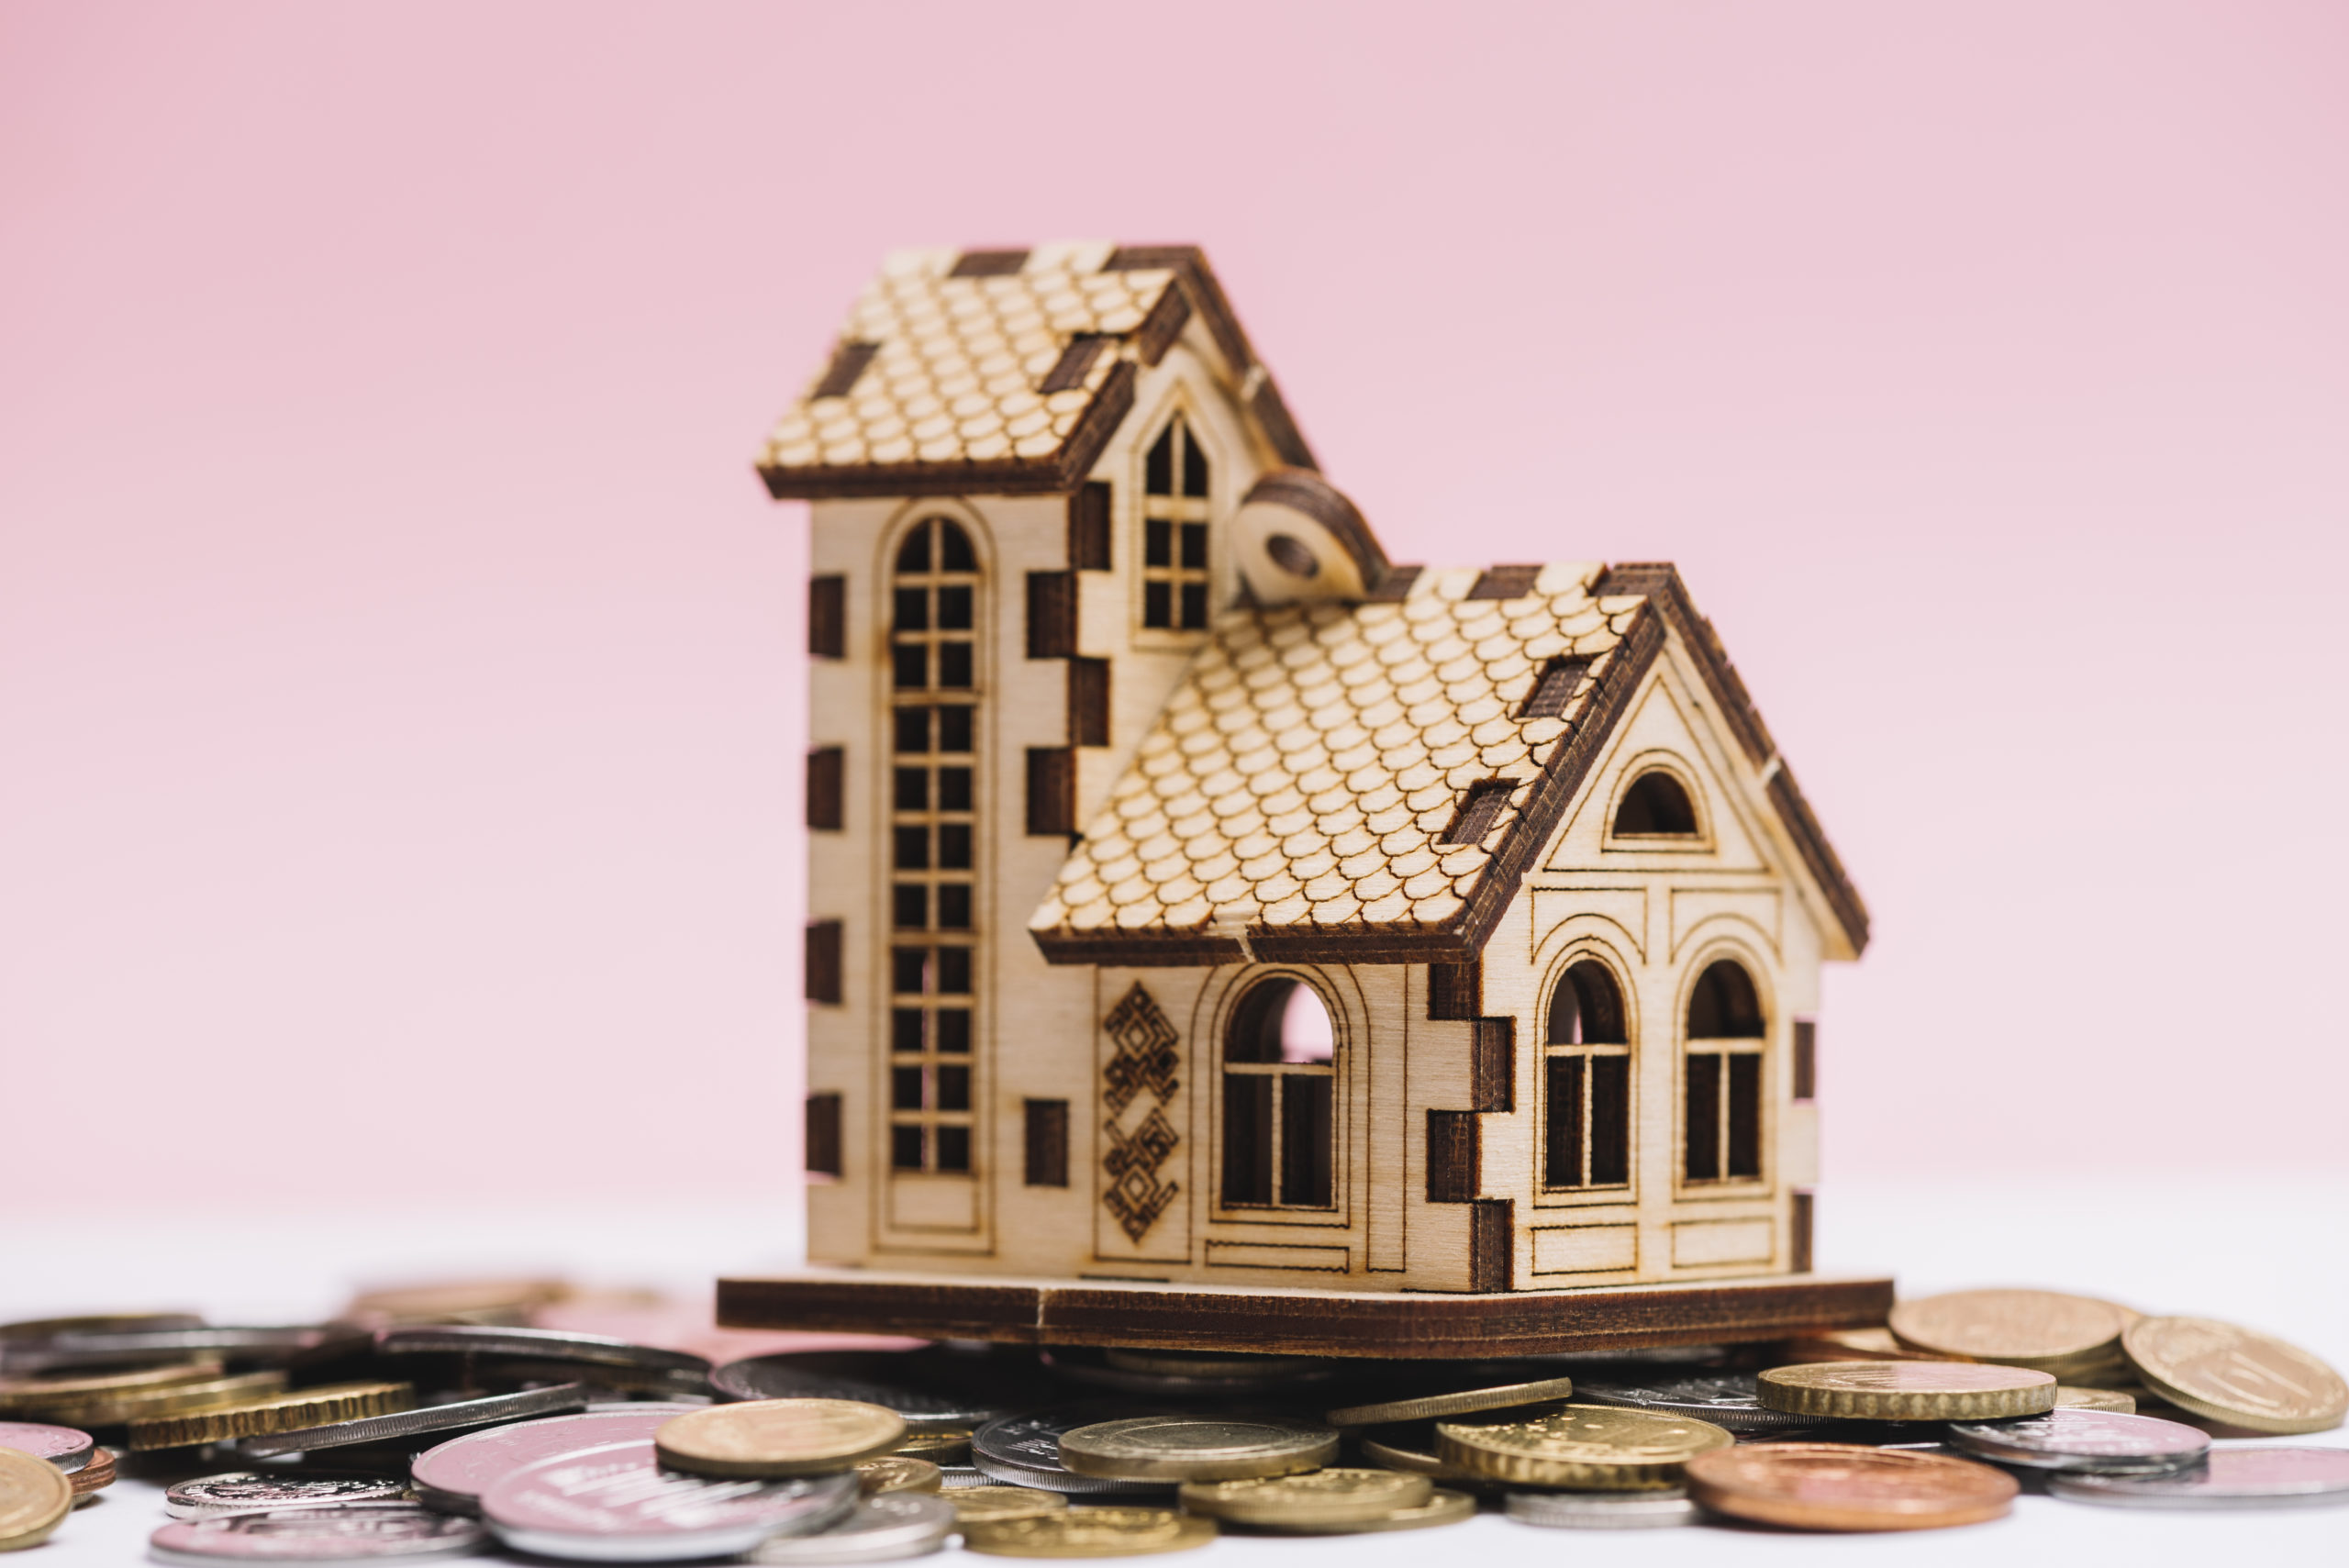 house-model-coins-front-pink-background